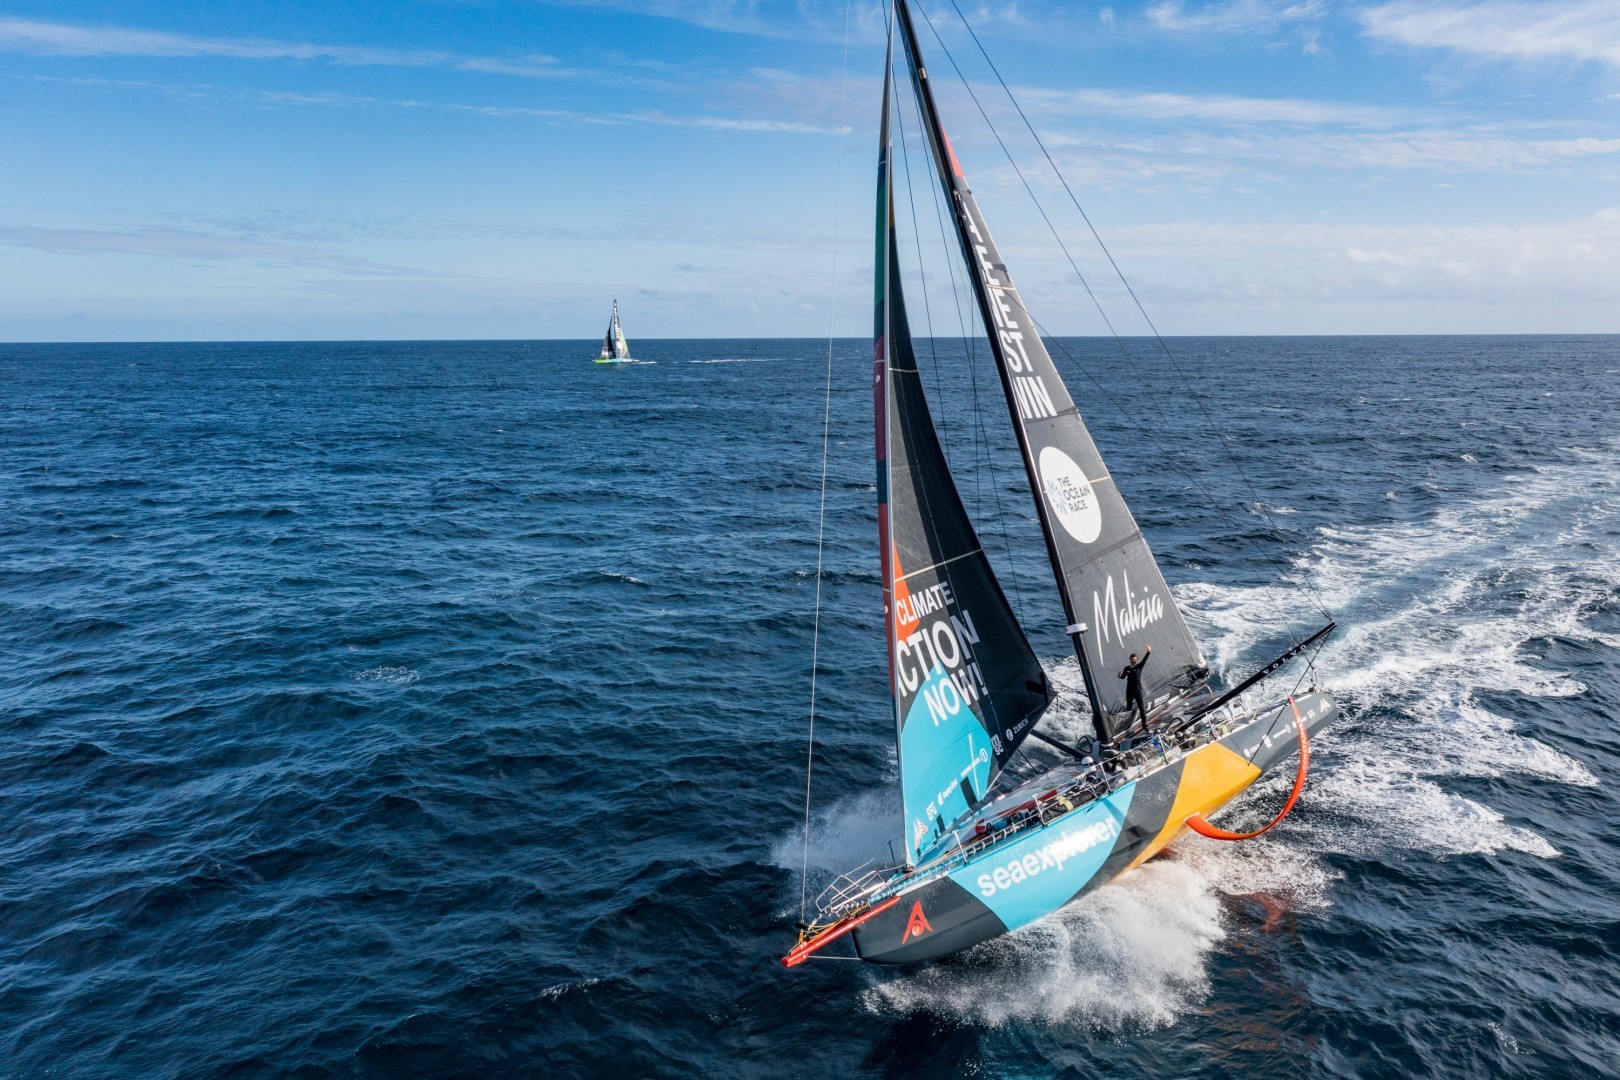 The Ocean Race 2022-23 - 30 March 2023, Leg 3 Day 32 onboard Team Malizia. Drone view of Team Malizia and Team Holcim - PRB neck to neck after 32 days of racing.
© Antoine Auriol / Team Malizia / The Ocean Race